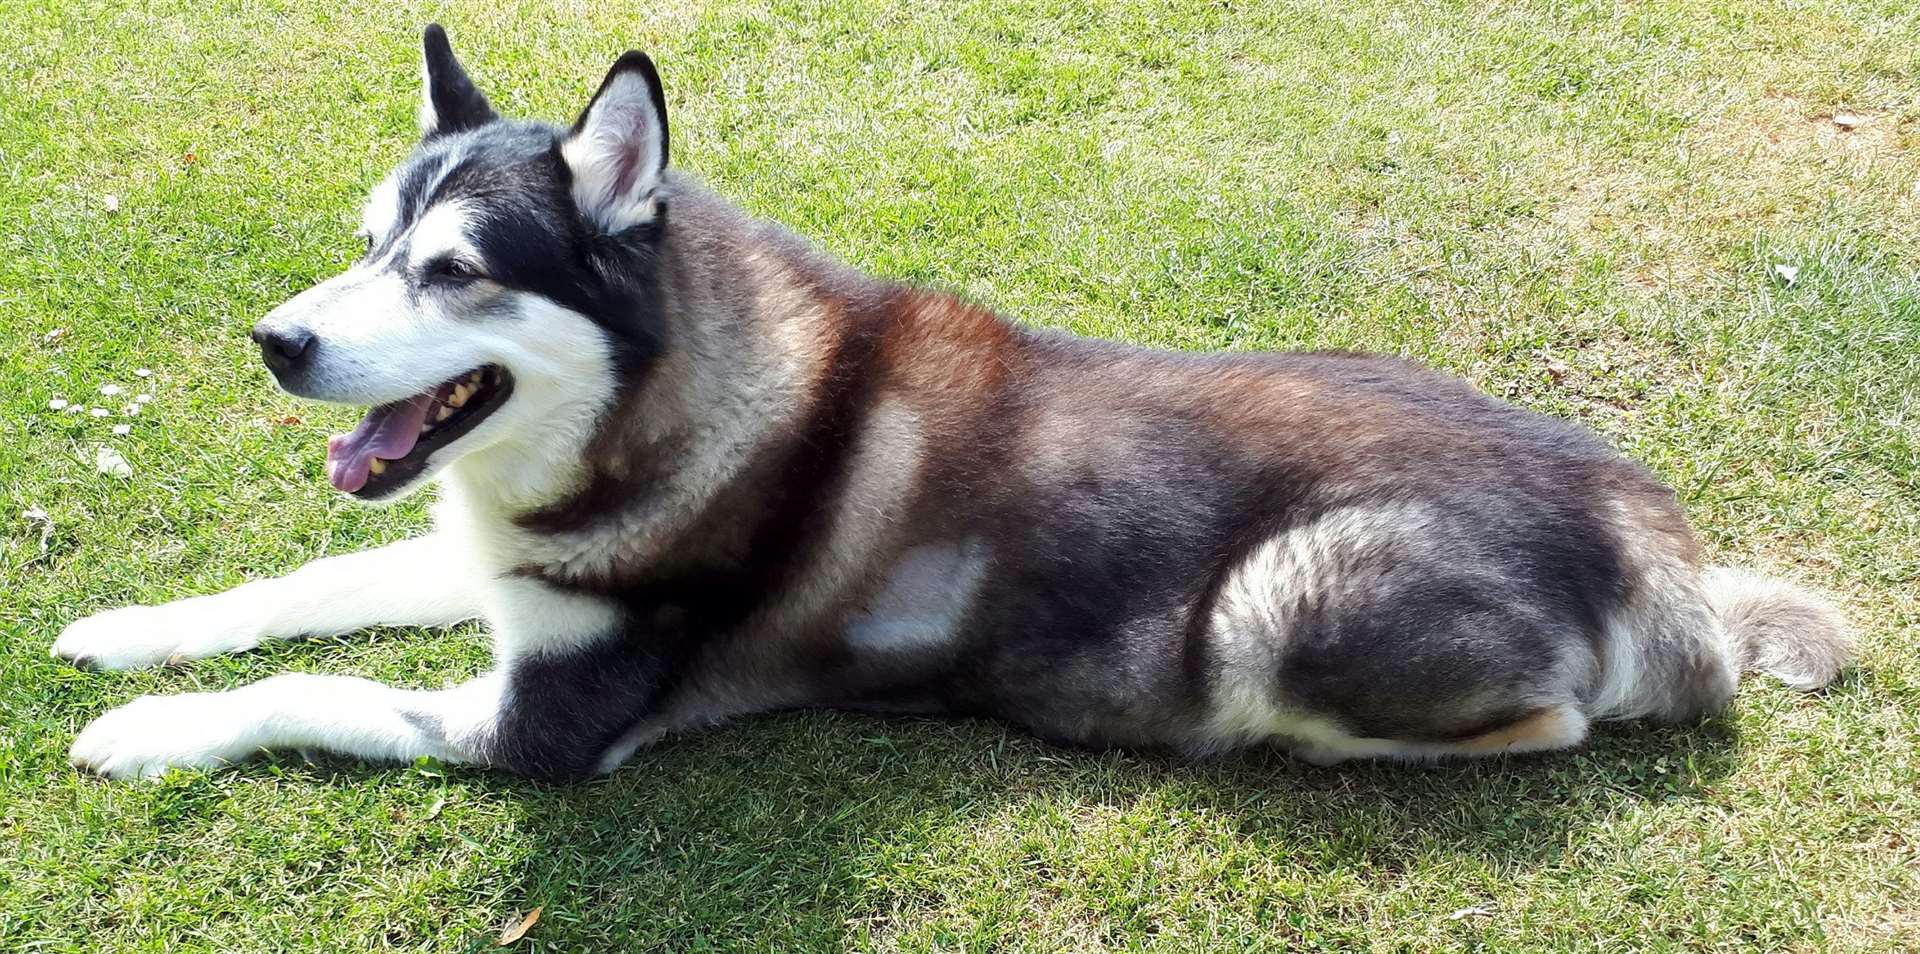 The 10-year-old Alaskan malamute started displaying the common symptoms of Covid-19 such as a dry cough and breathlessness. Picture: Mandy Hayes